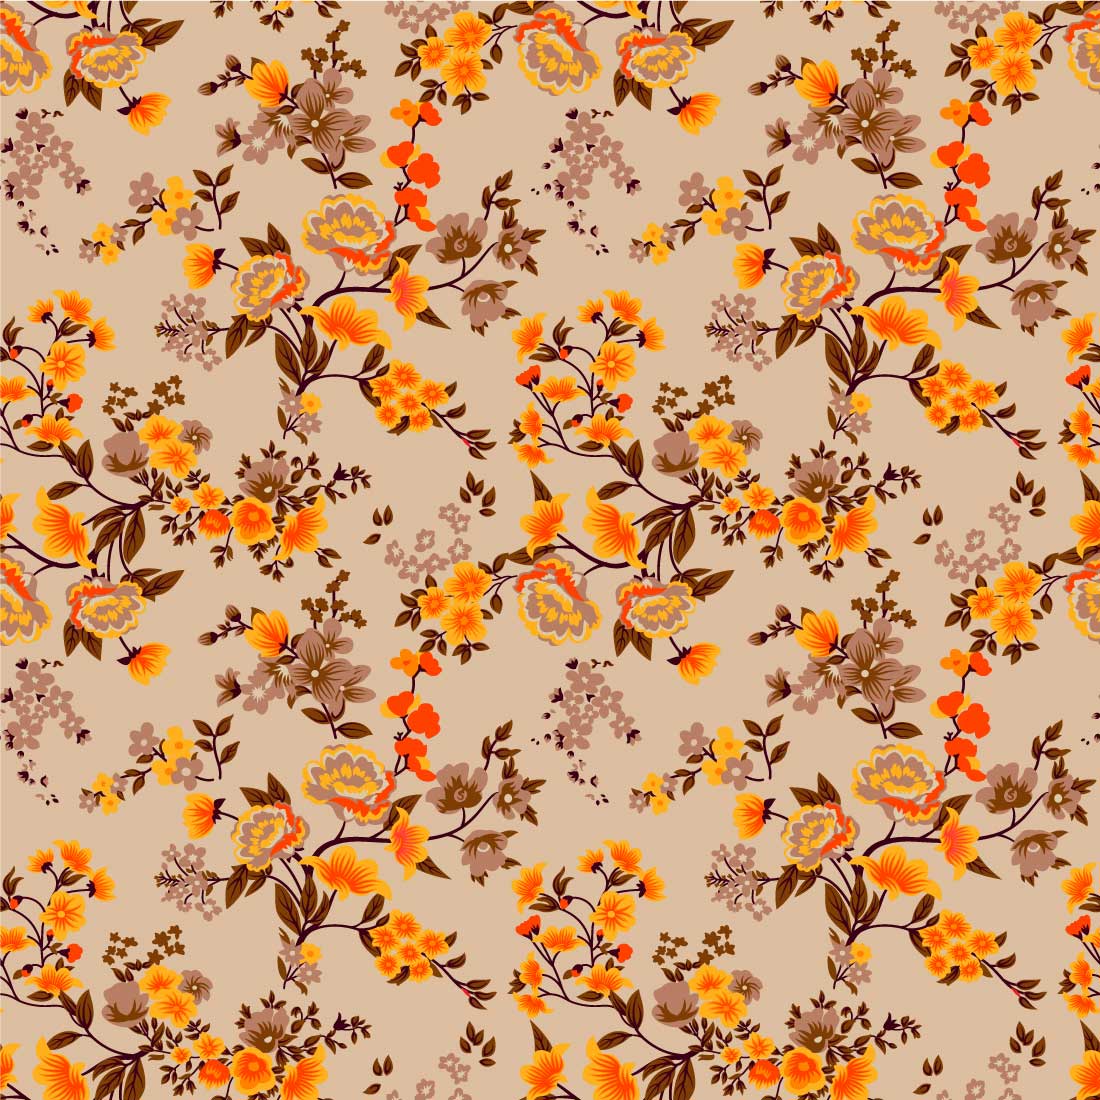 Orange and brown floral pattern on a beige background.